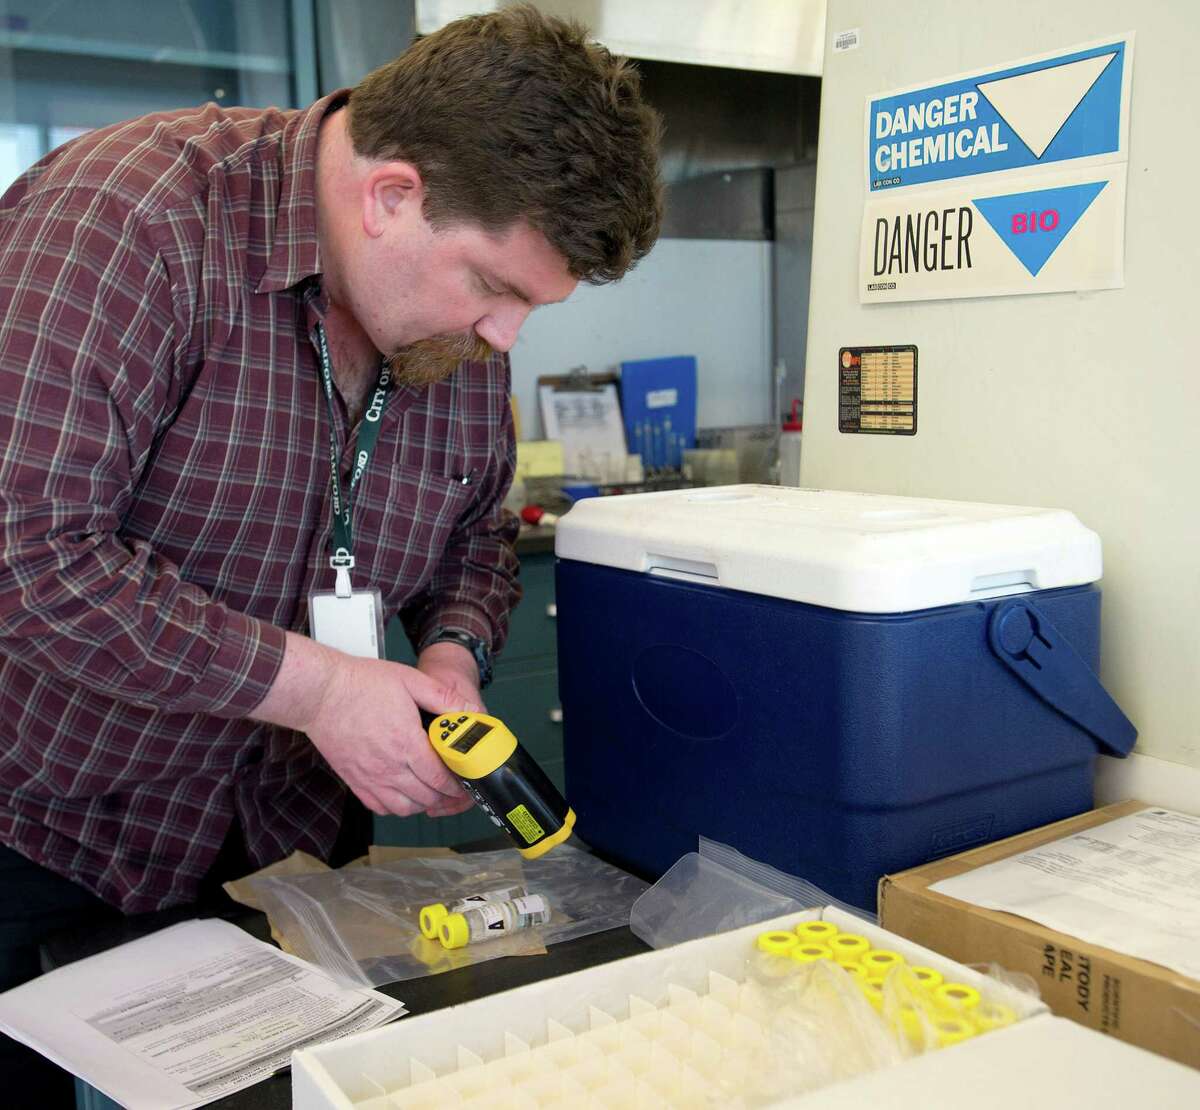 Jason Glenn labels well watersamples to be tested for pesticides, arsenic and uranium at the Heath Department Laboratory at Government Center in Stamford, Conn., on Tuesday, March 18, 2014.